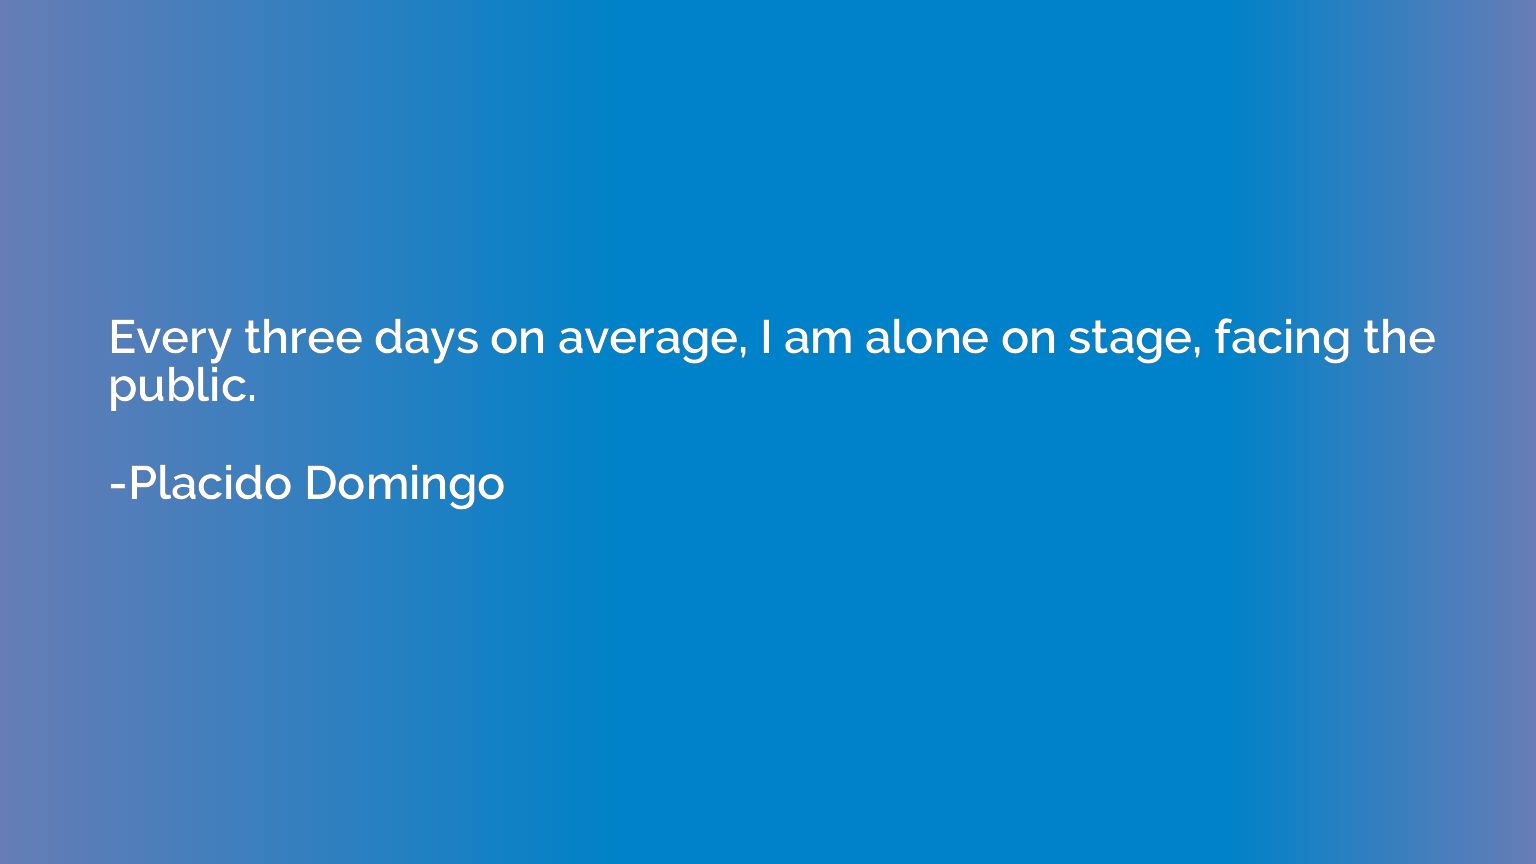 Every three days on average, I am alone on stage, facing the